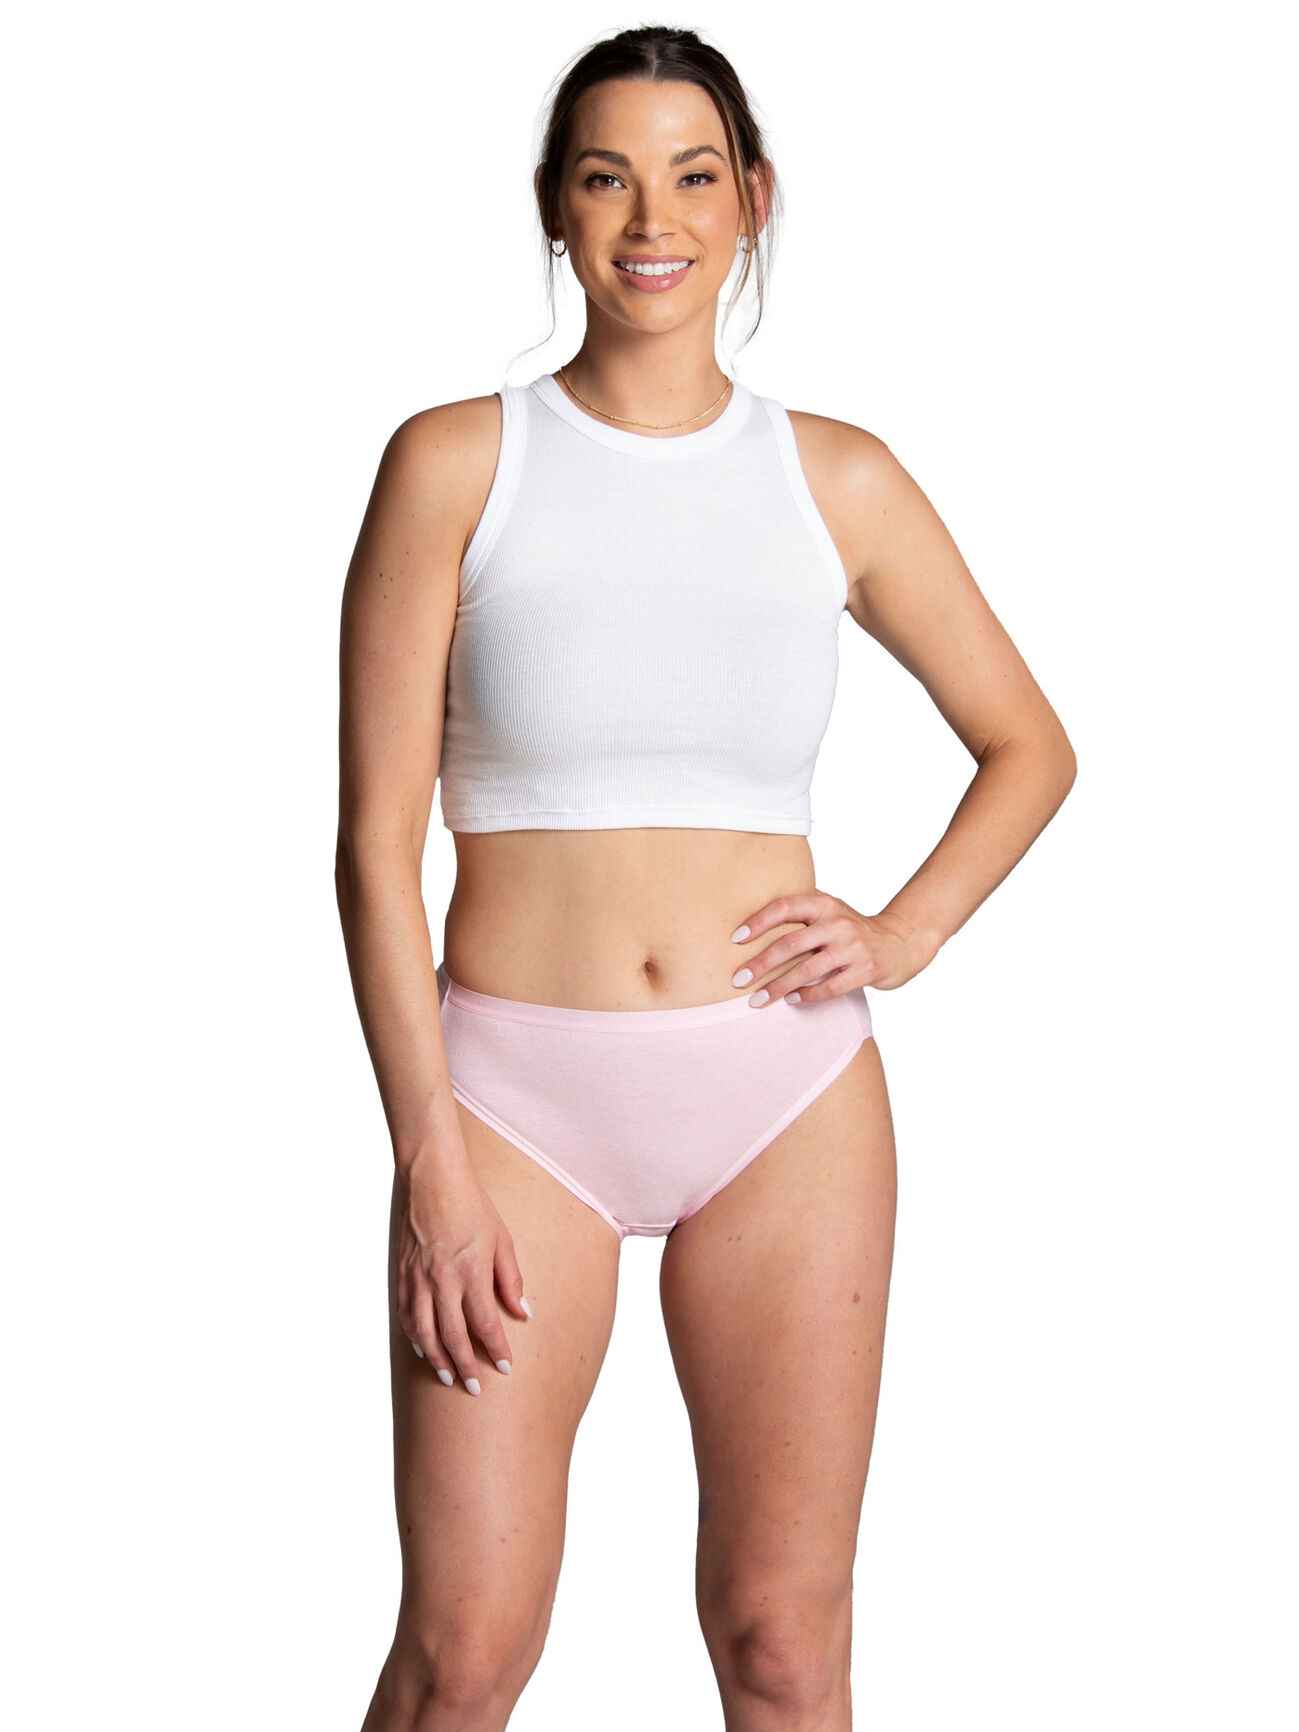 Fruit of the Loom Women's 6 Pack Cotton Hi-Cuts Sizes 8,9 NEW Briefs